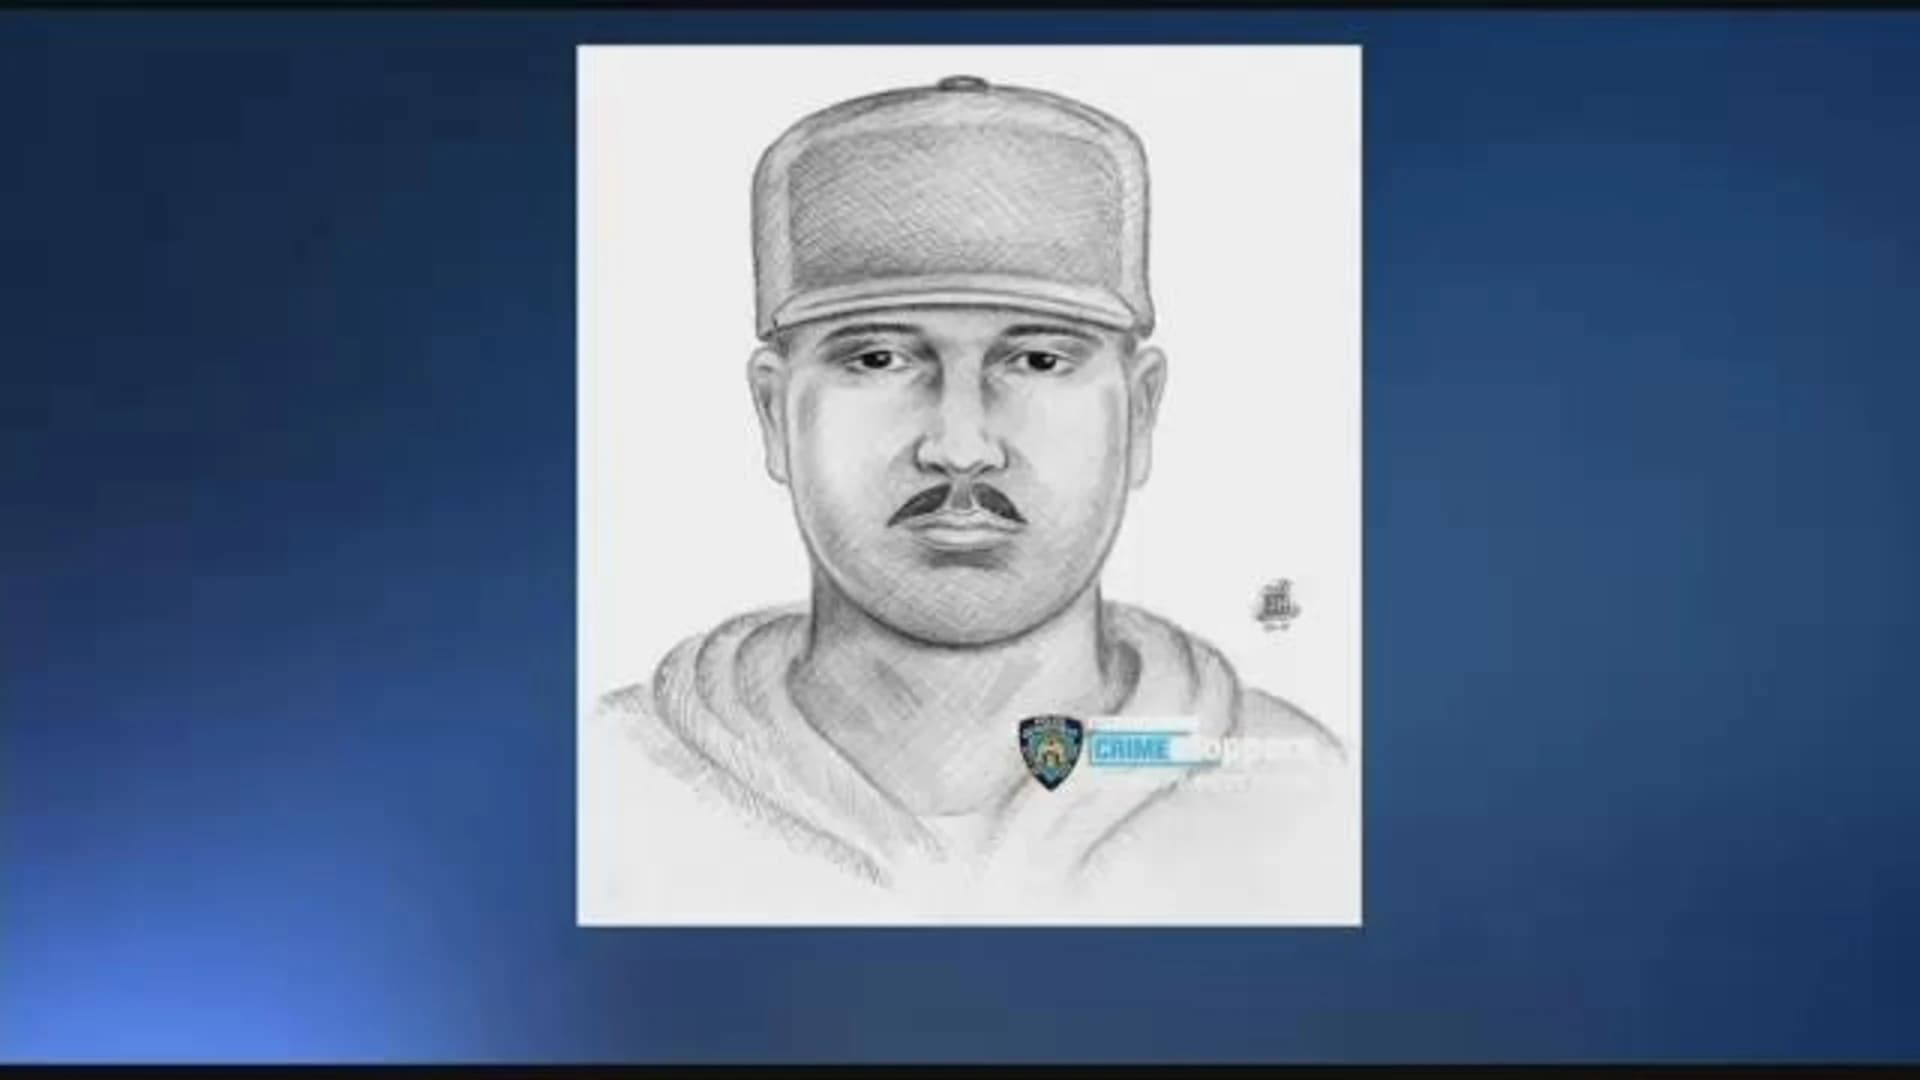 Man accused of touching himself in front of 2 girls in Dyker Heights